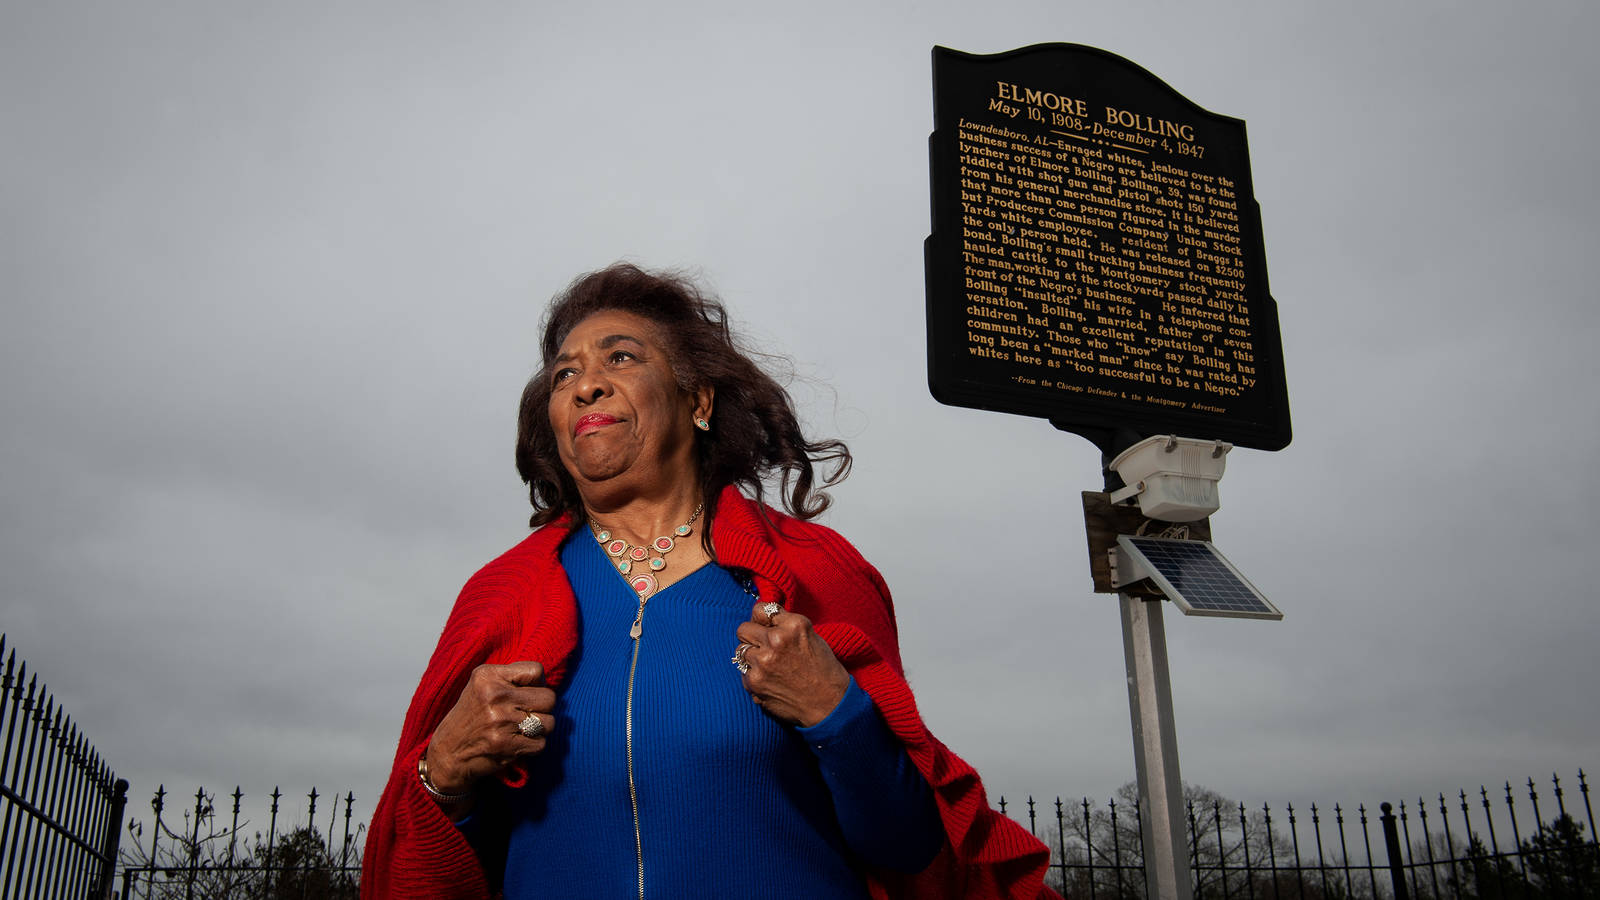 <p>Josephine Bolling McCall’s father, Elmore Bolling, was lynched in Lowndesboro, Alabama, in 1947 for being “too successful” as a Black businessman. Bolling McCall, pictured beside the roadside marker for her father along the Selma to Montgomery National Historic Trail, believes acknowledging the truth of lynching in this country is the only way to ensure history does not repeat itself. </p>